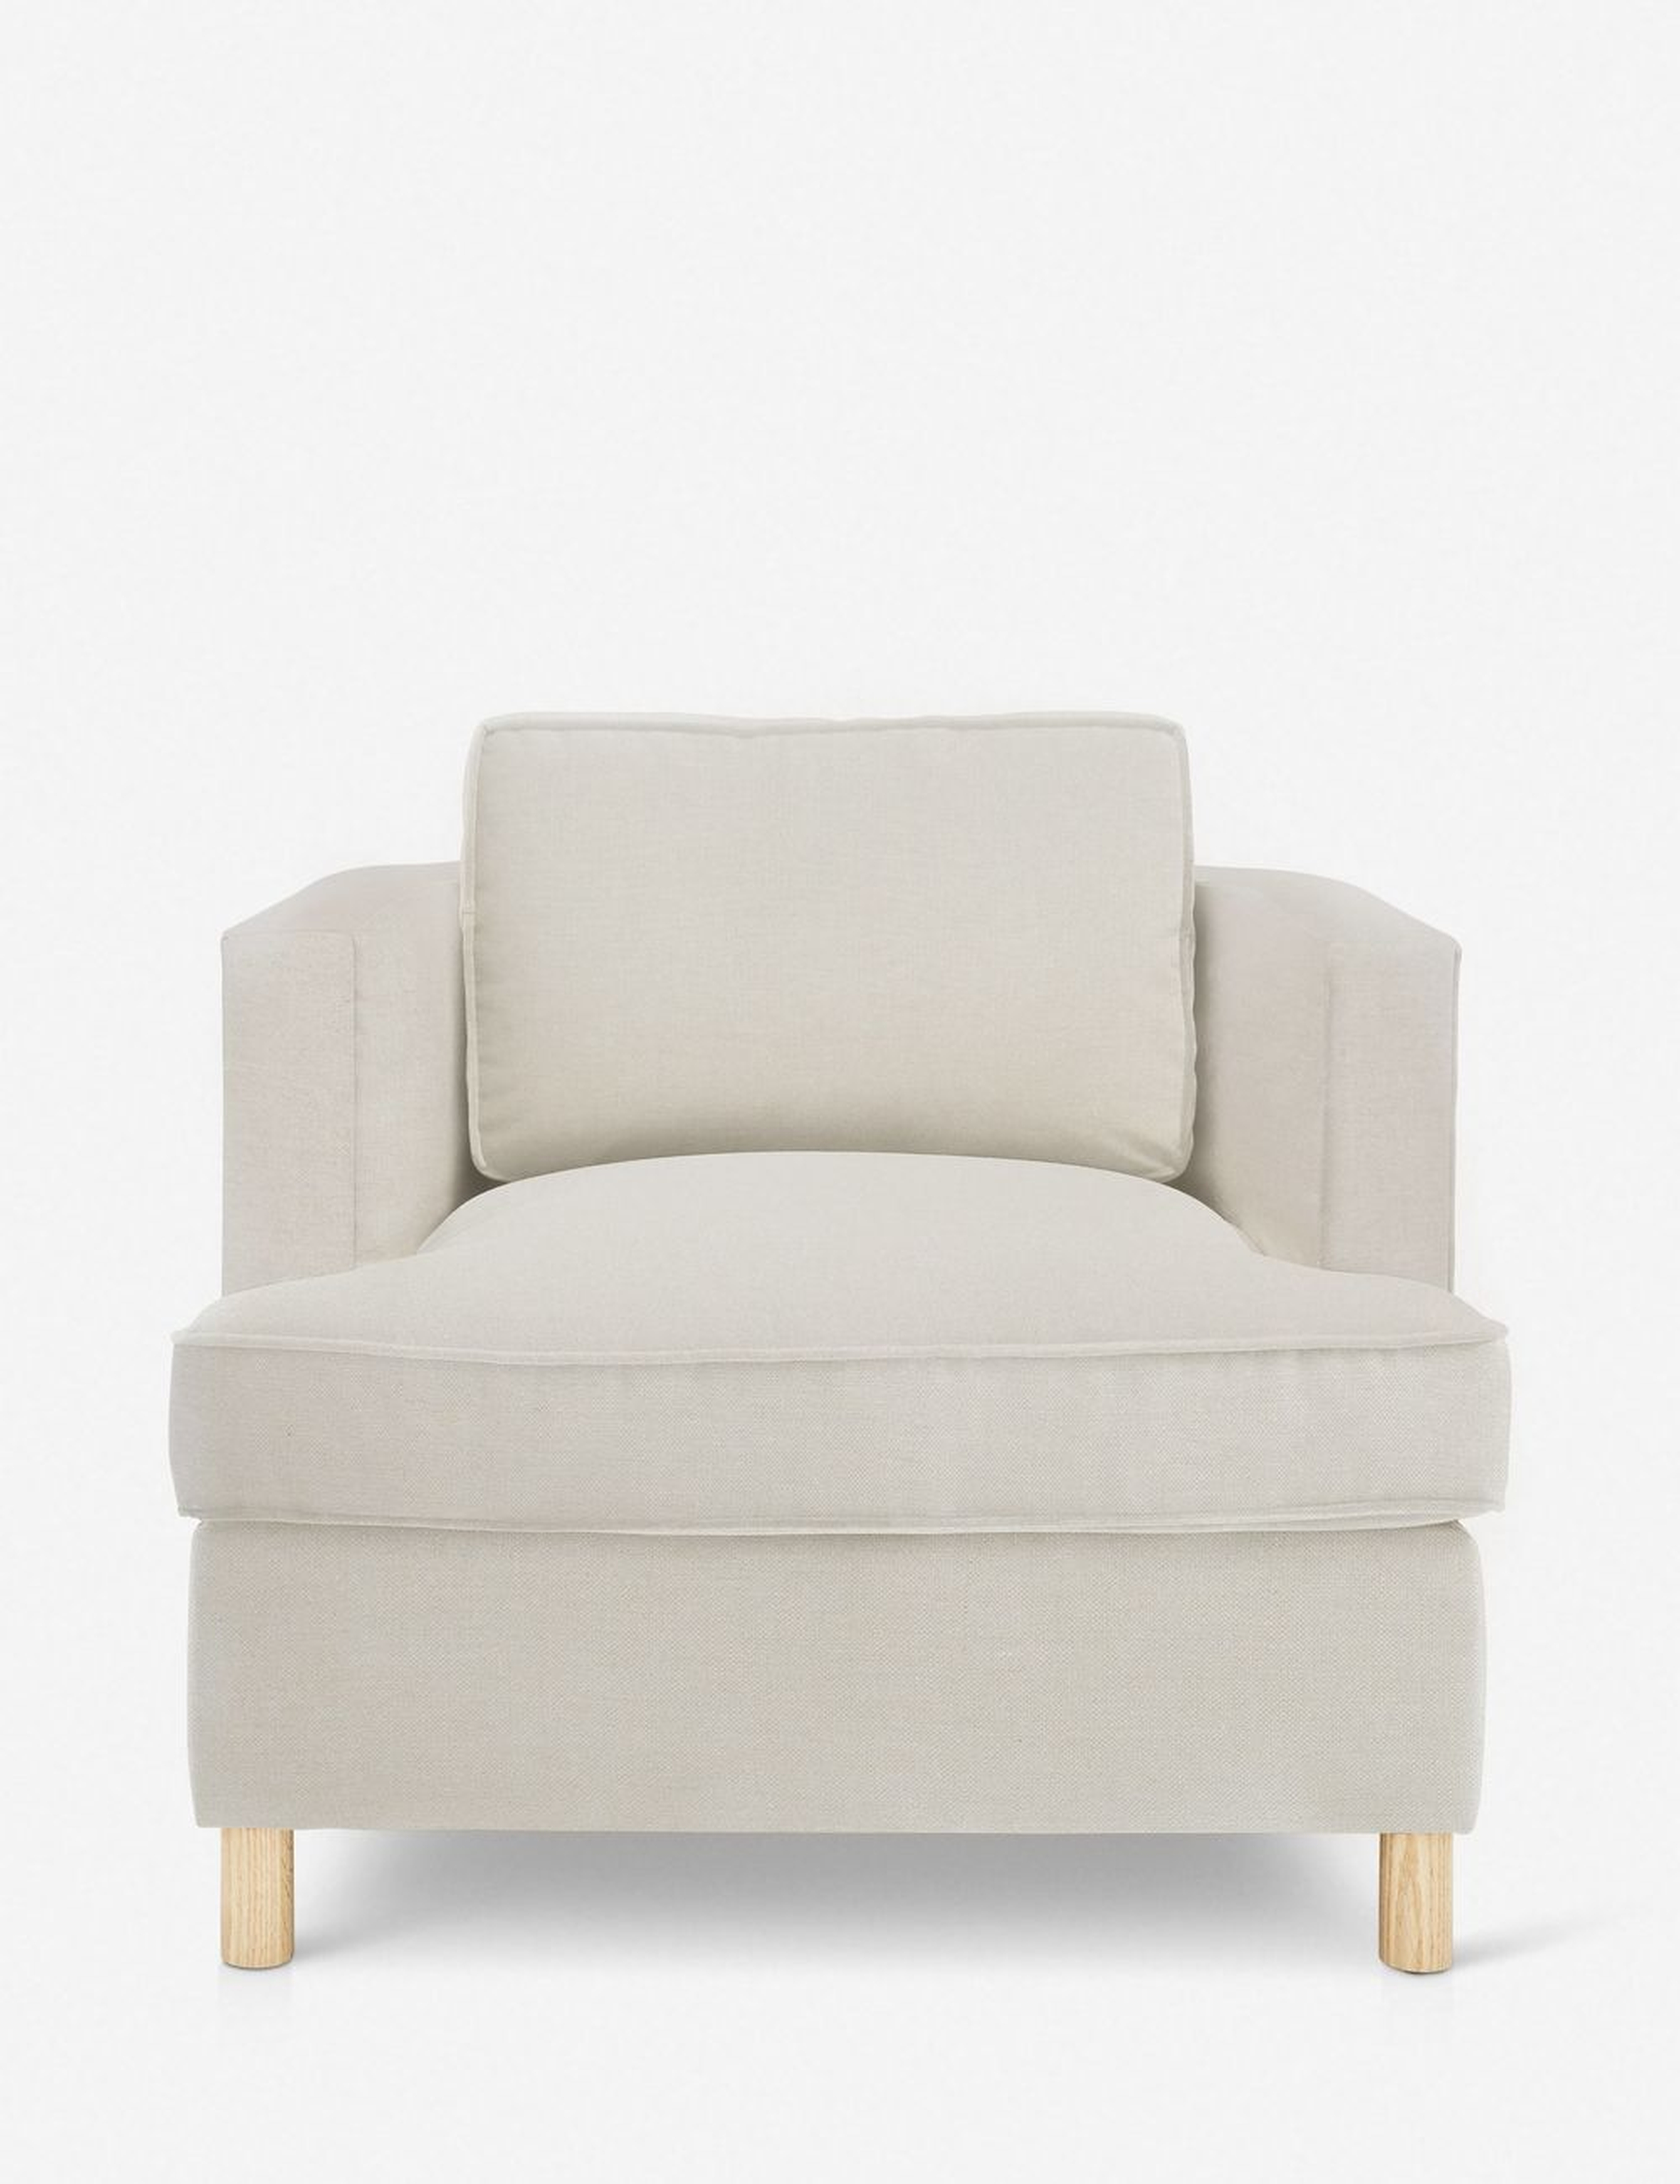 Belmont Accent Chair by Ginny Macdonald - Lulu and Georgia